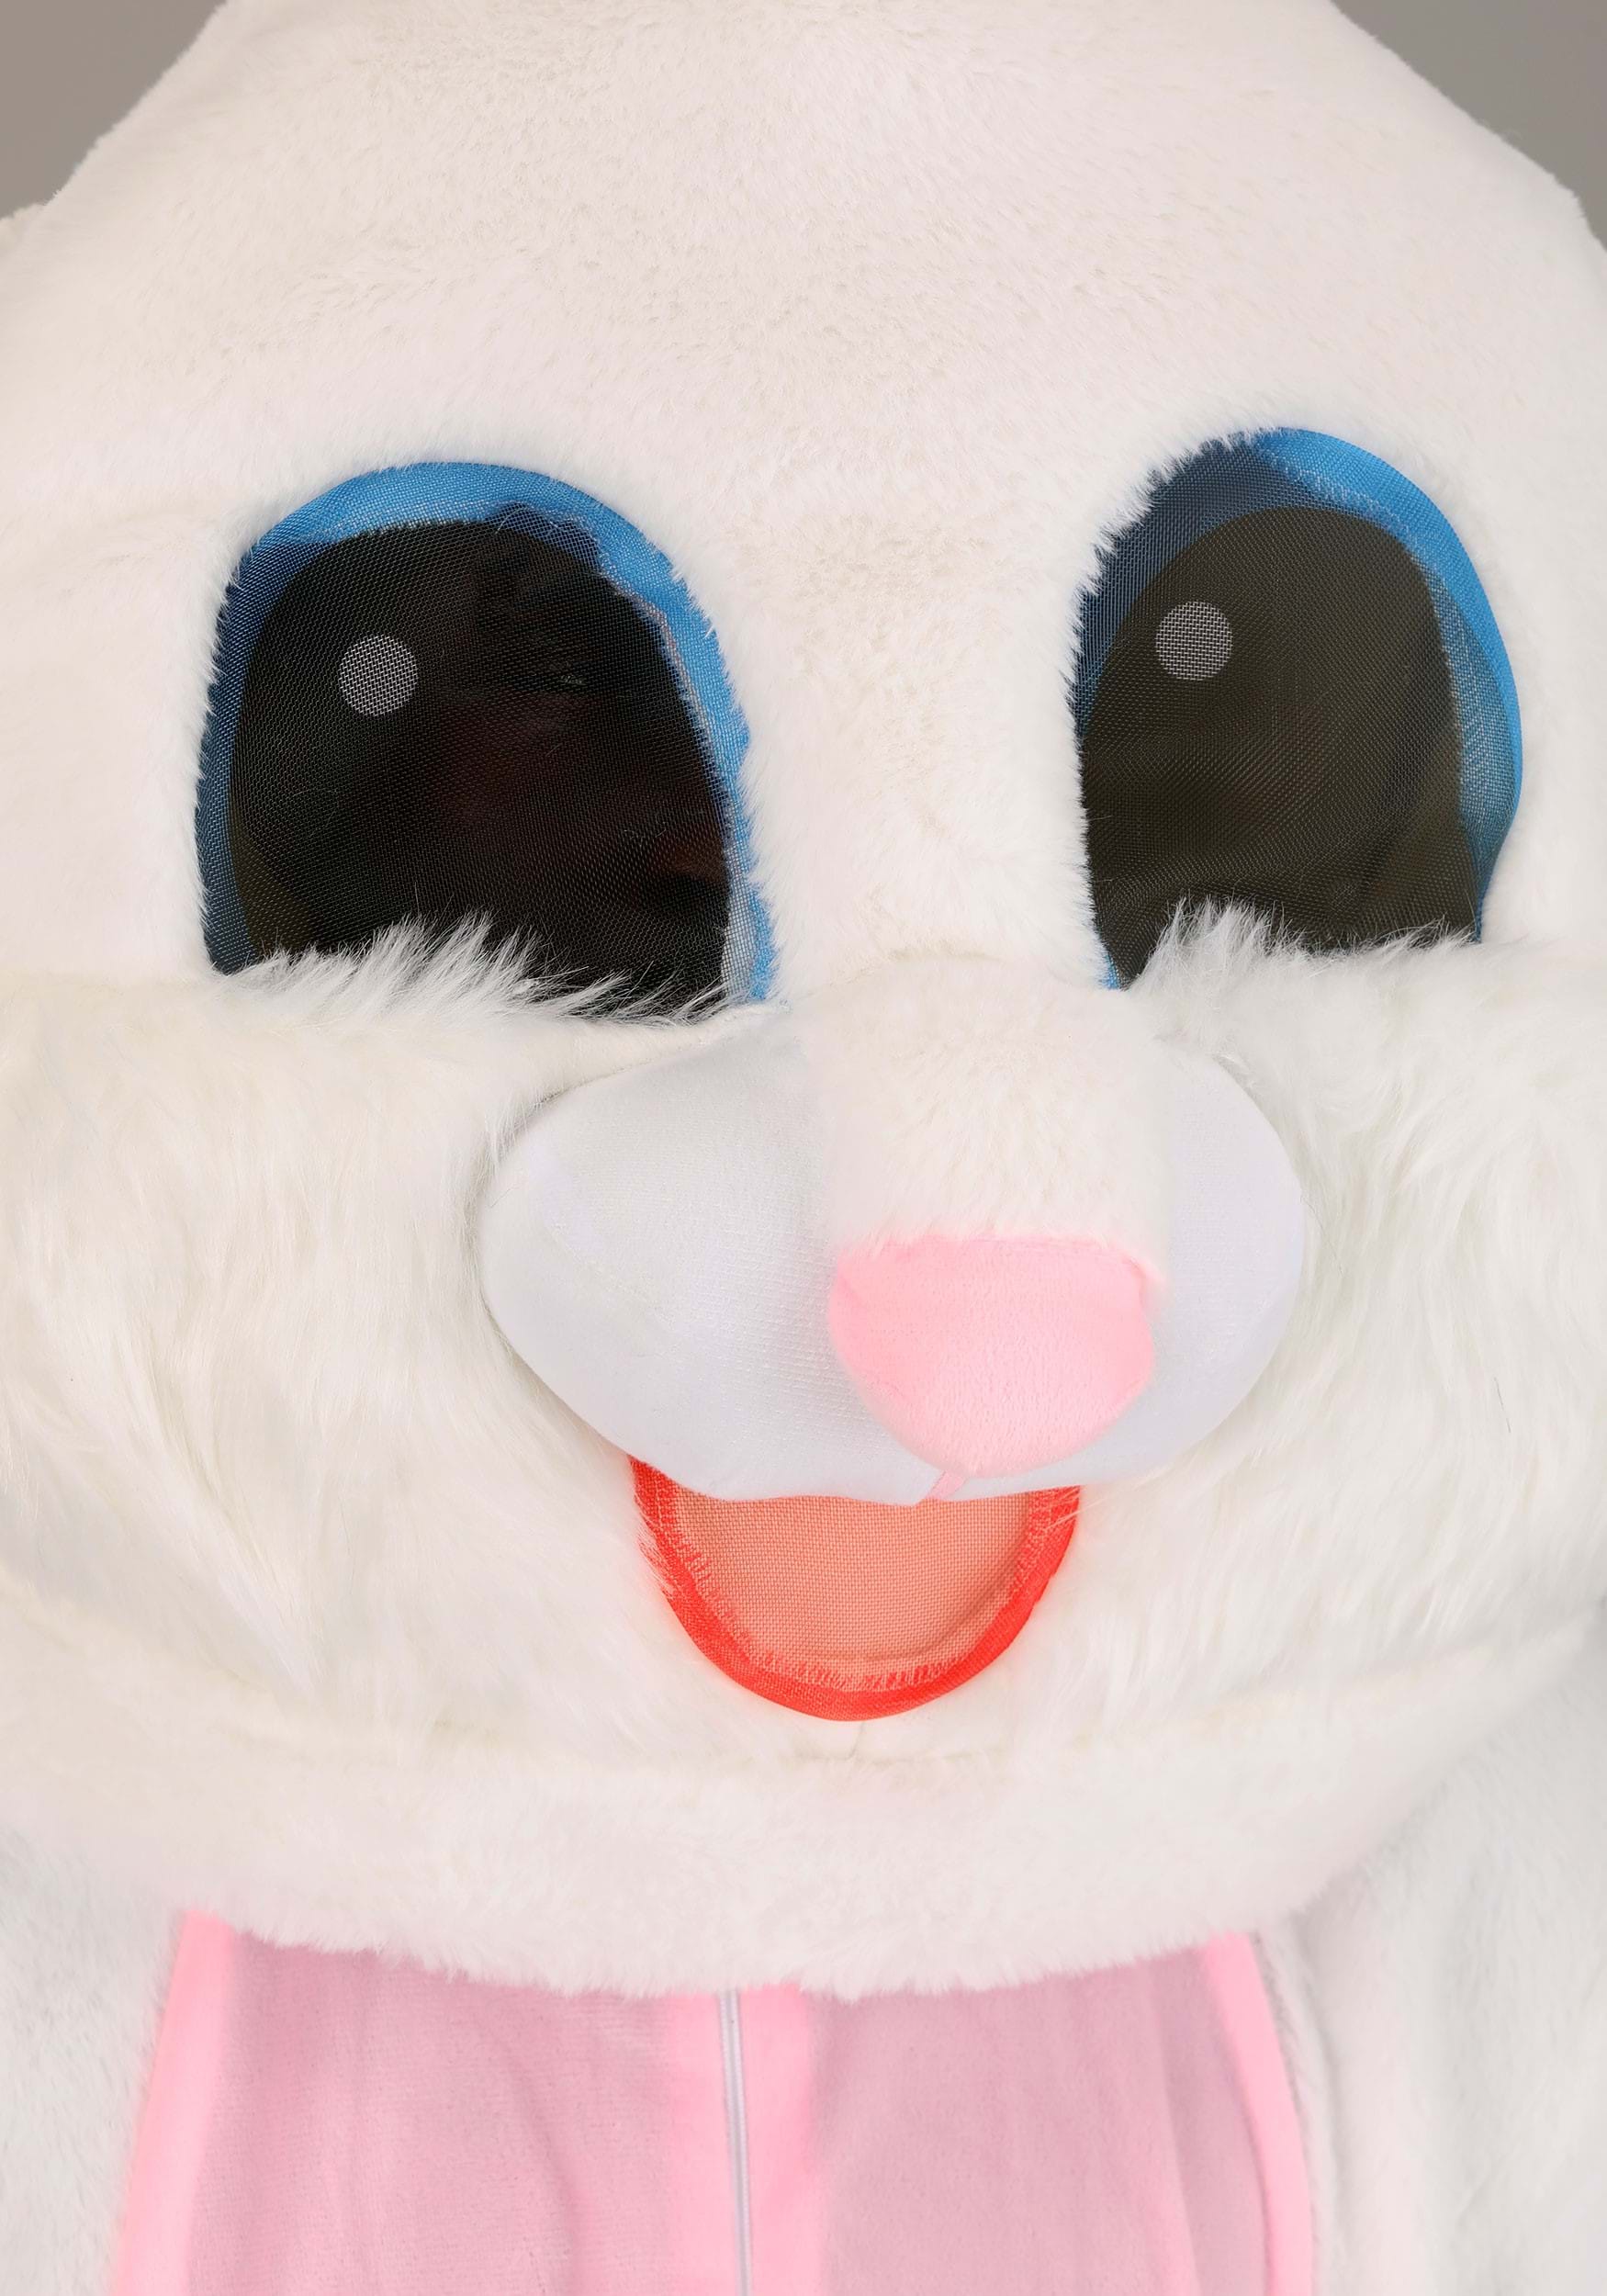 https://images.halloweencostumes.com/products/53930/2-1-269317/plus-size-mascot-easter-bunny-costume-alt-5.jpg